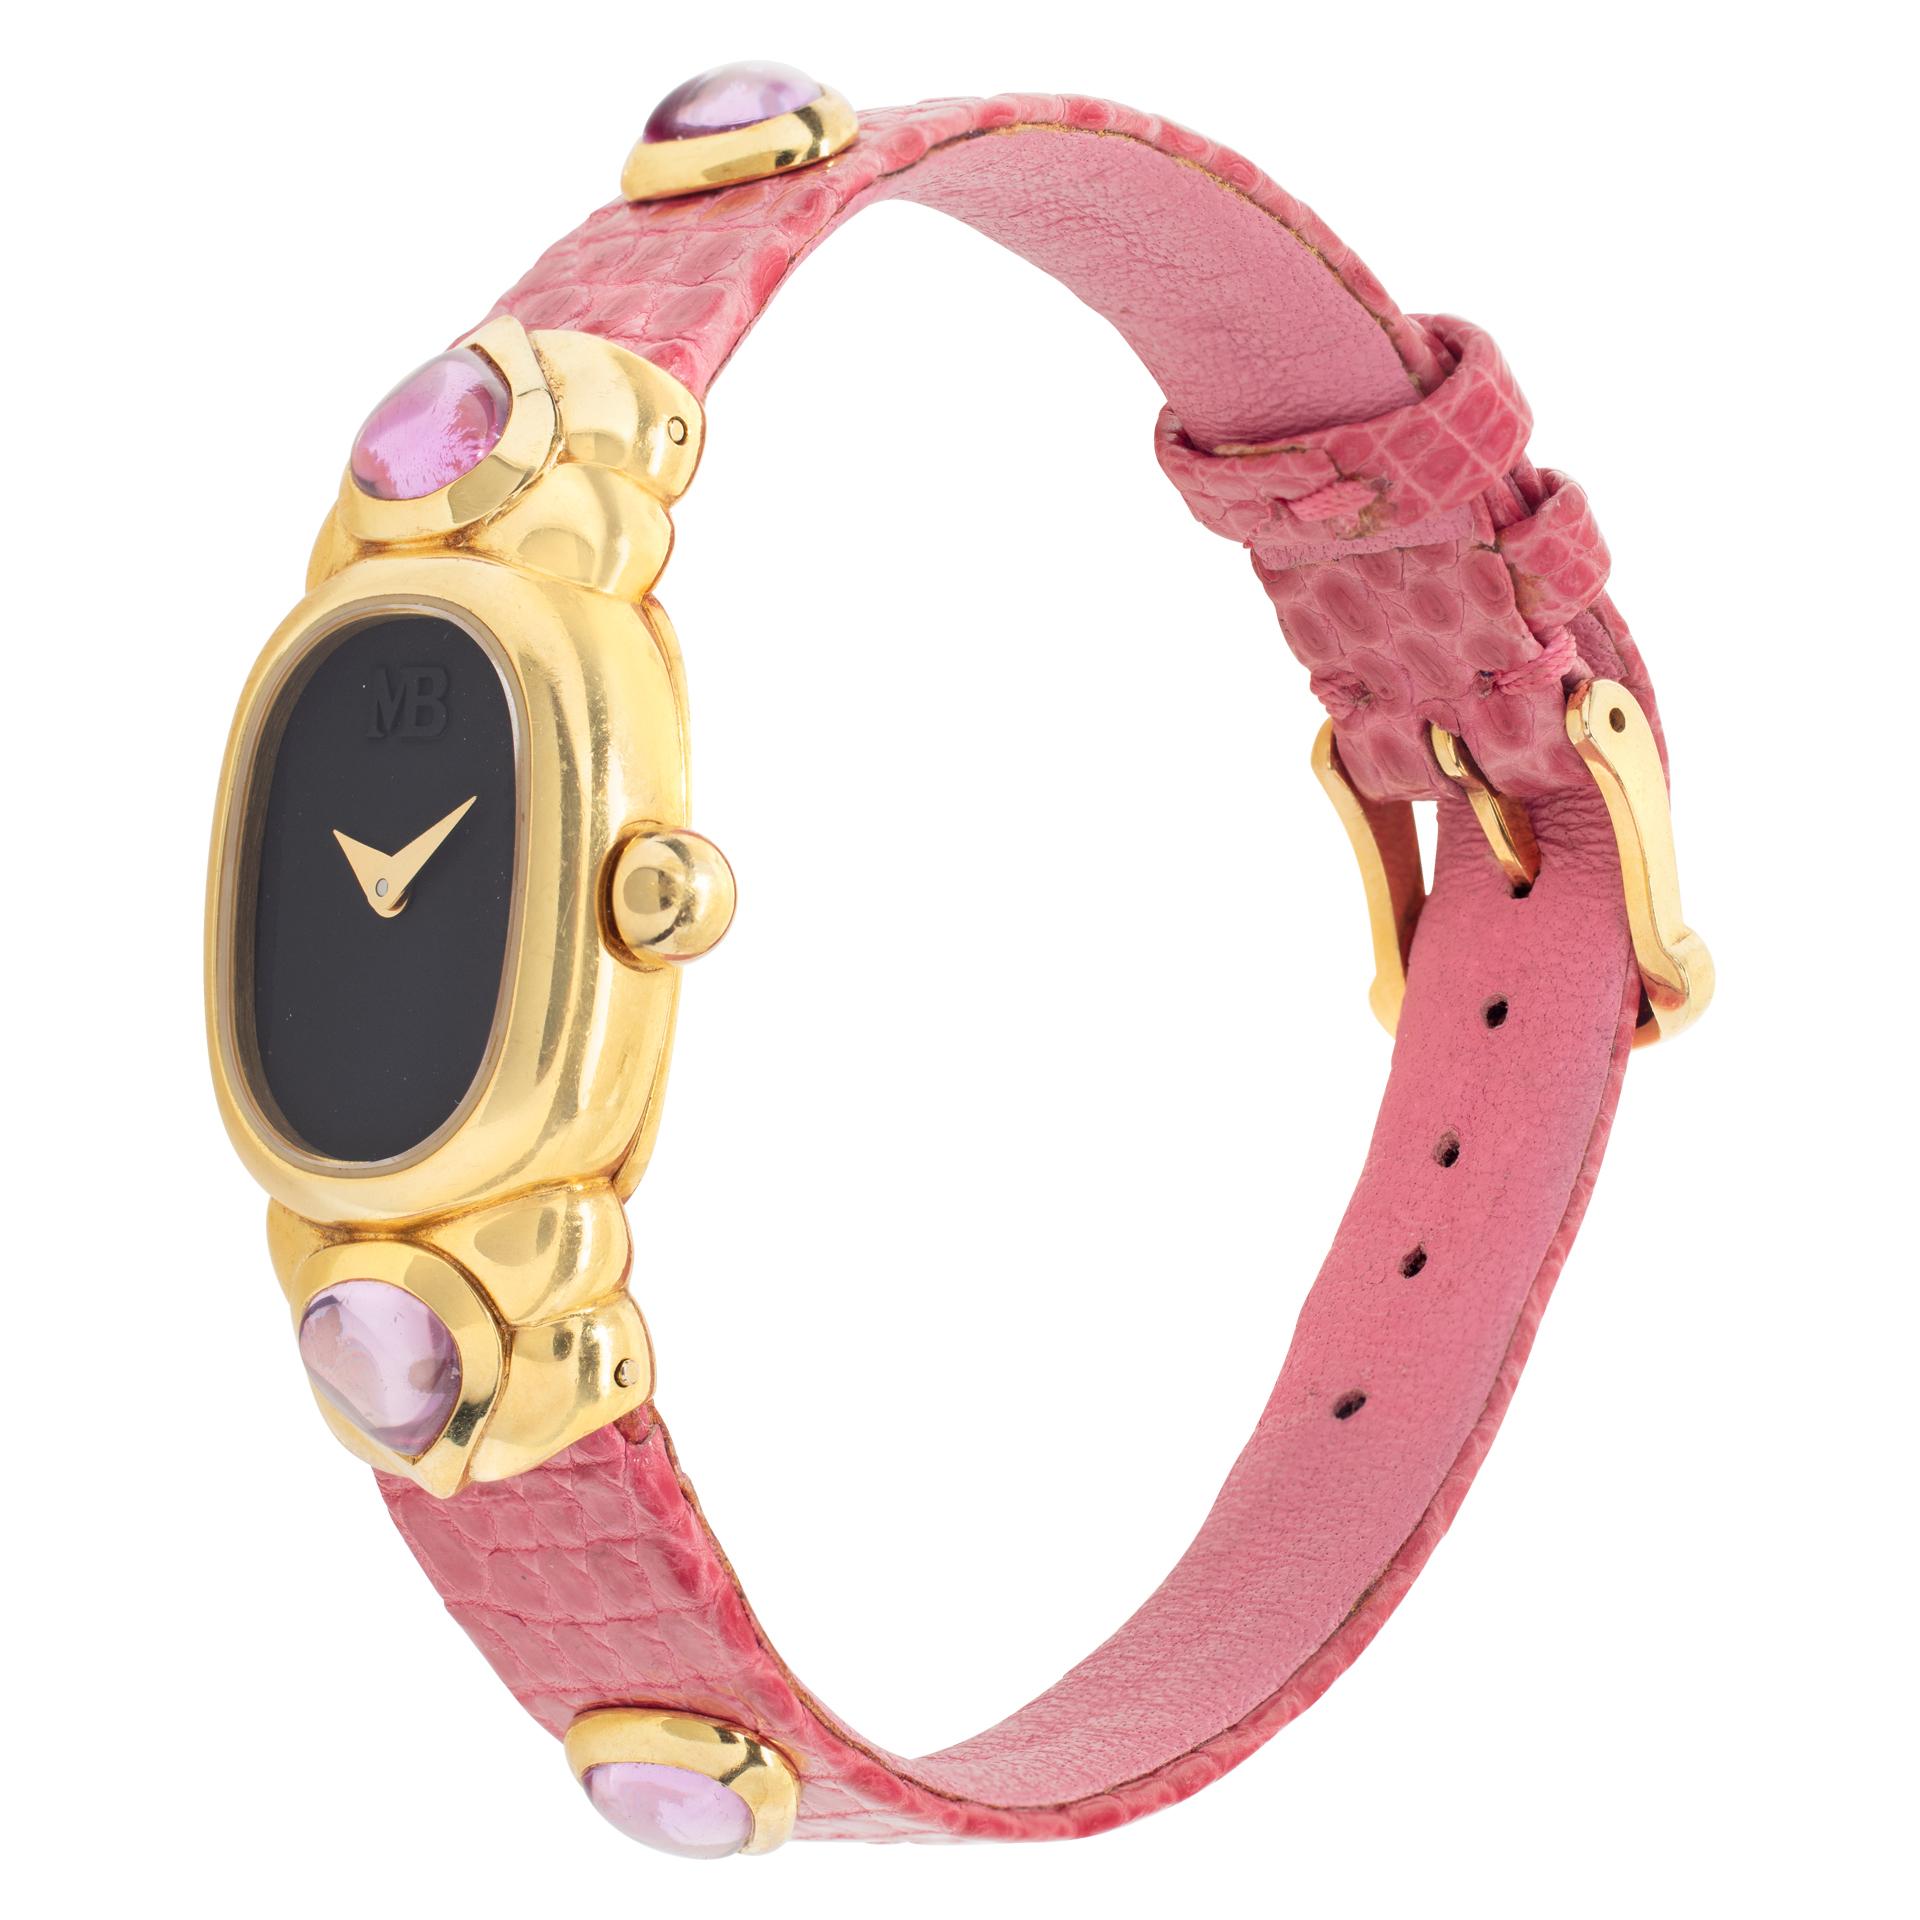 Marina B Classic in 18k yellow gold with pink cabochon tourmaline accents on a pink lizard strap & original Marina B tang buckle. Quartz. 16 mm case size. Ref 975. Fine Pre-owned Marina B Watch. Certified preowned Dress Marina B Classic 975 watch is